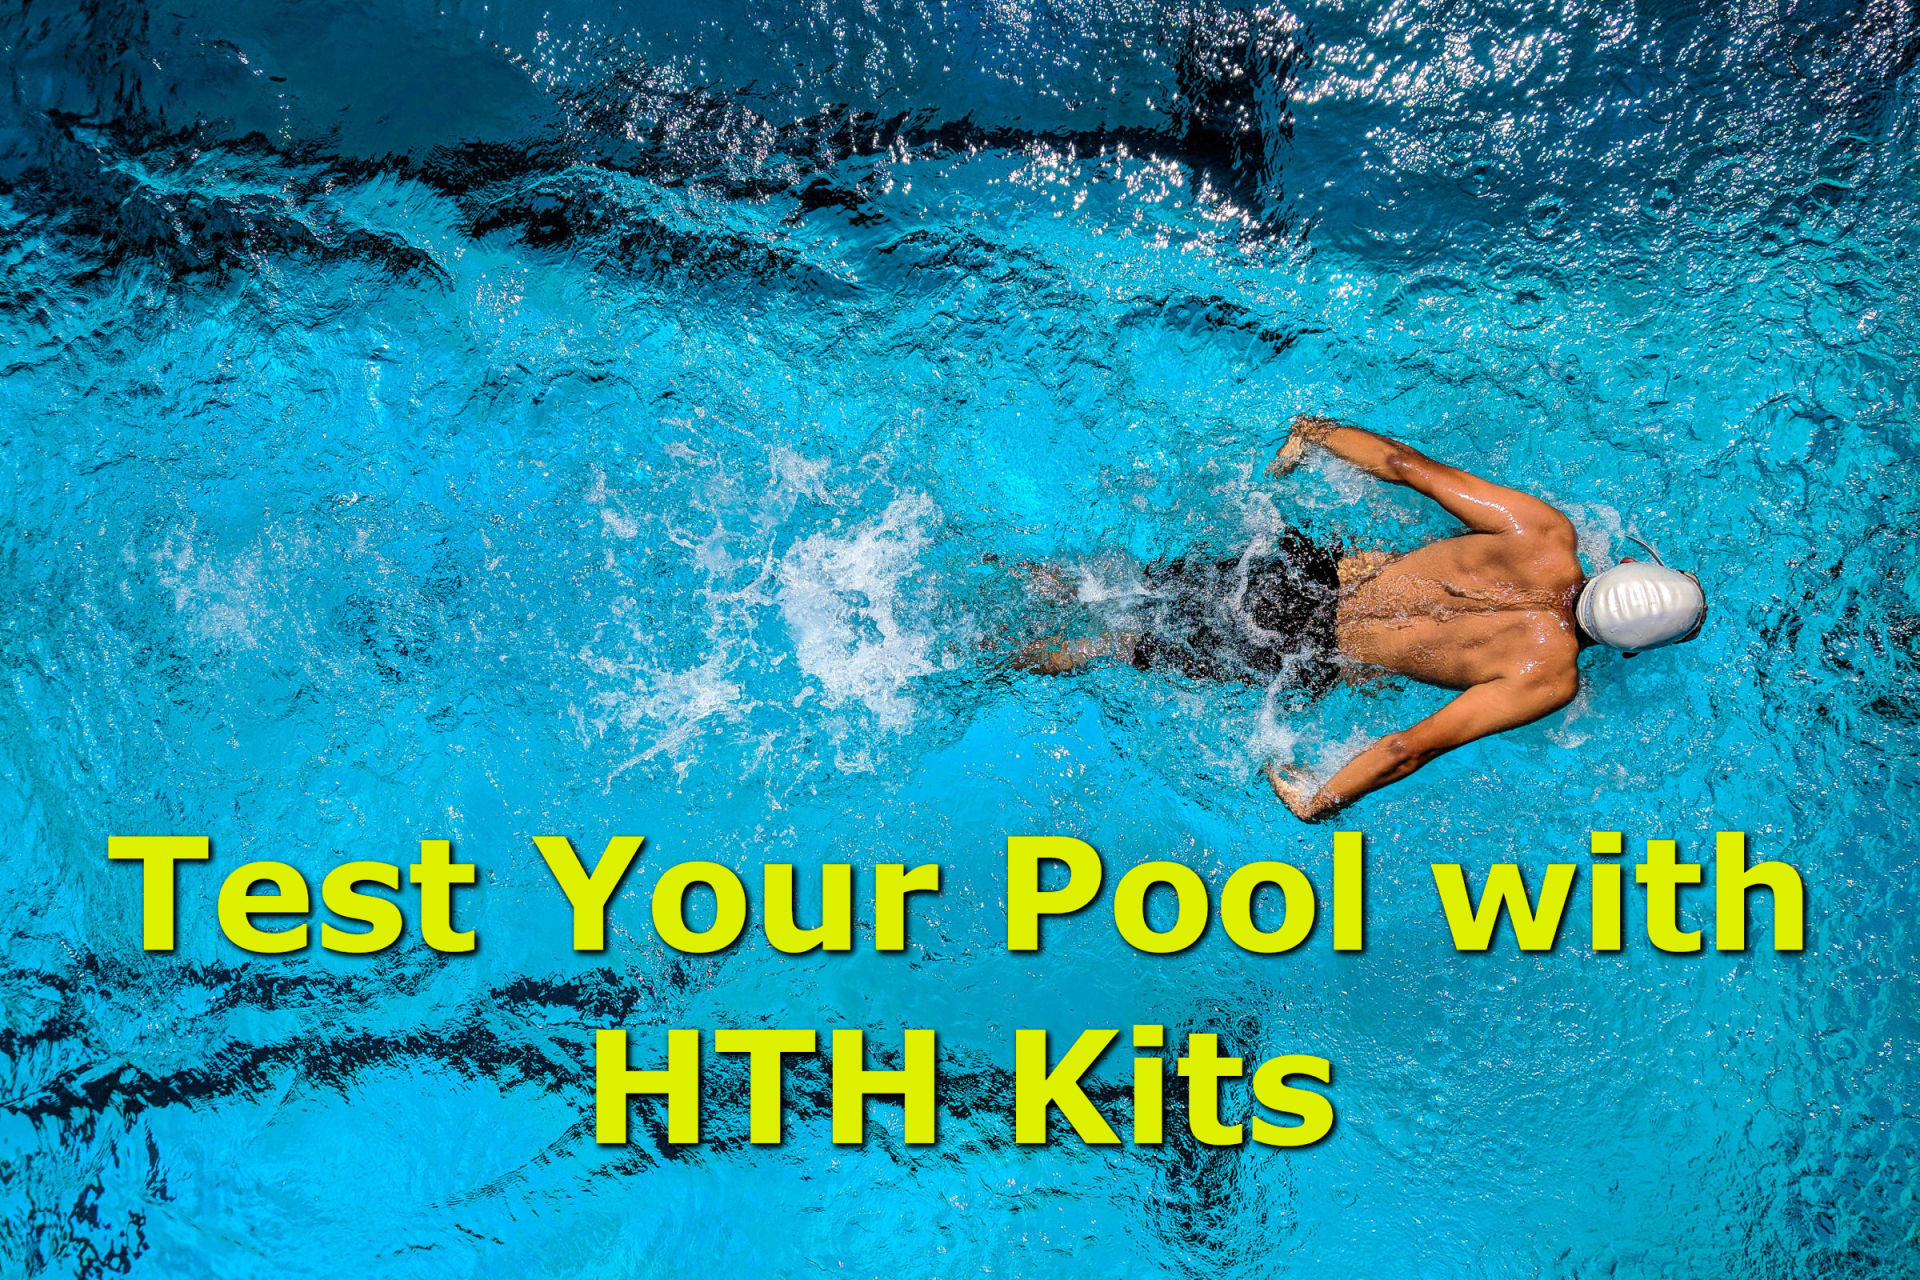 Man swimming in pool tested with HTH kit